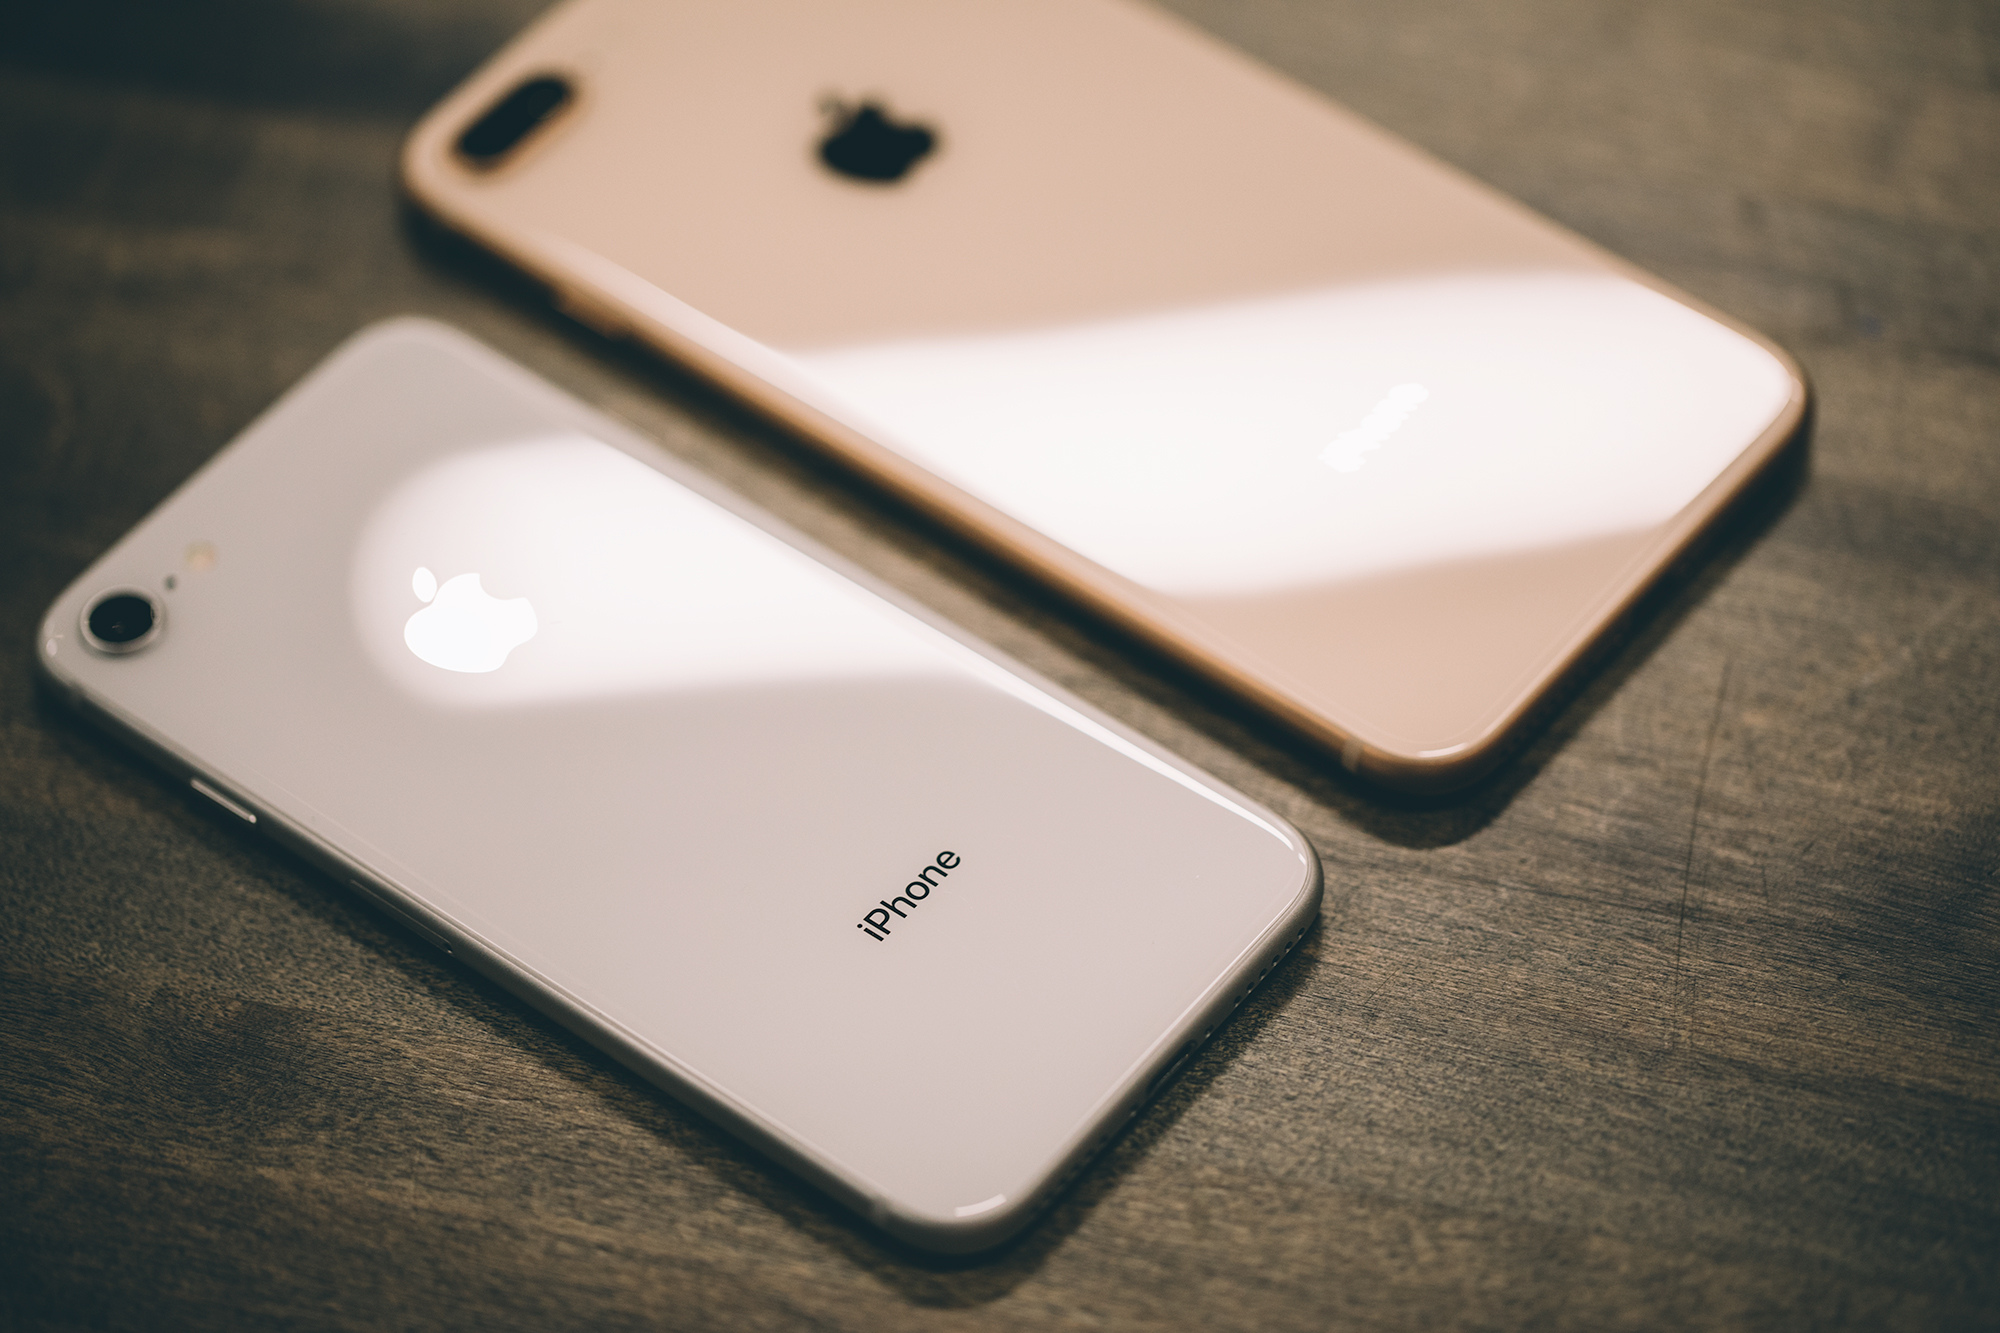 Apple is looking into reports of iPhone 8 batteries swelling